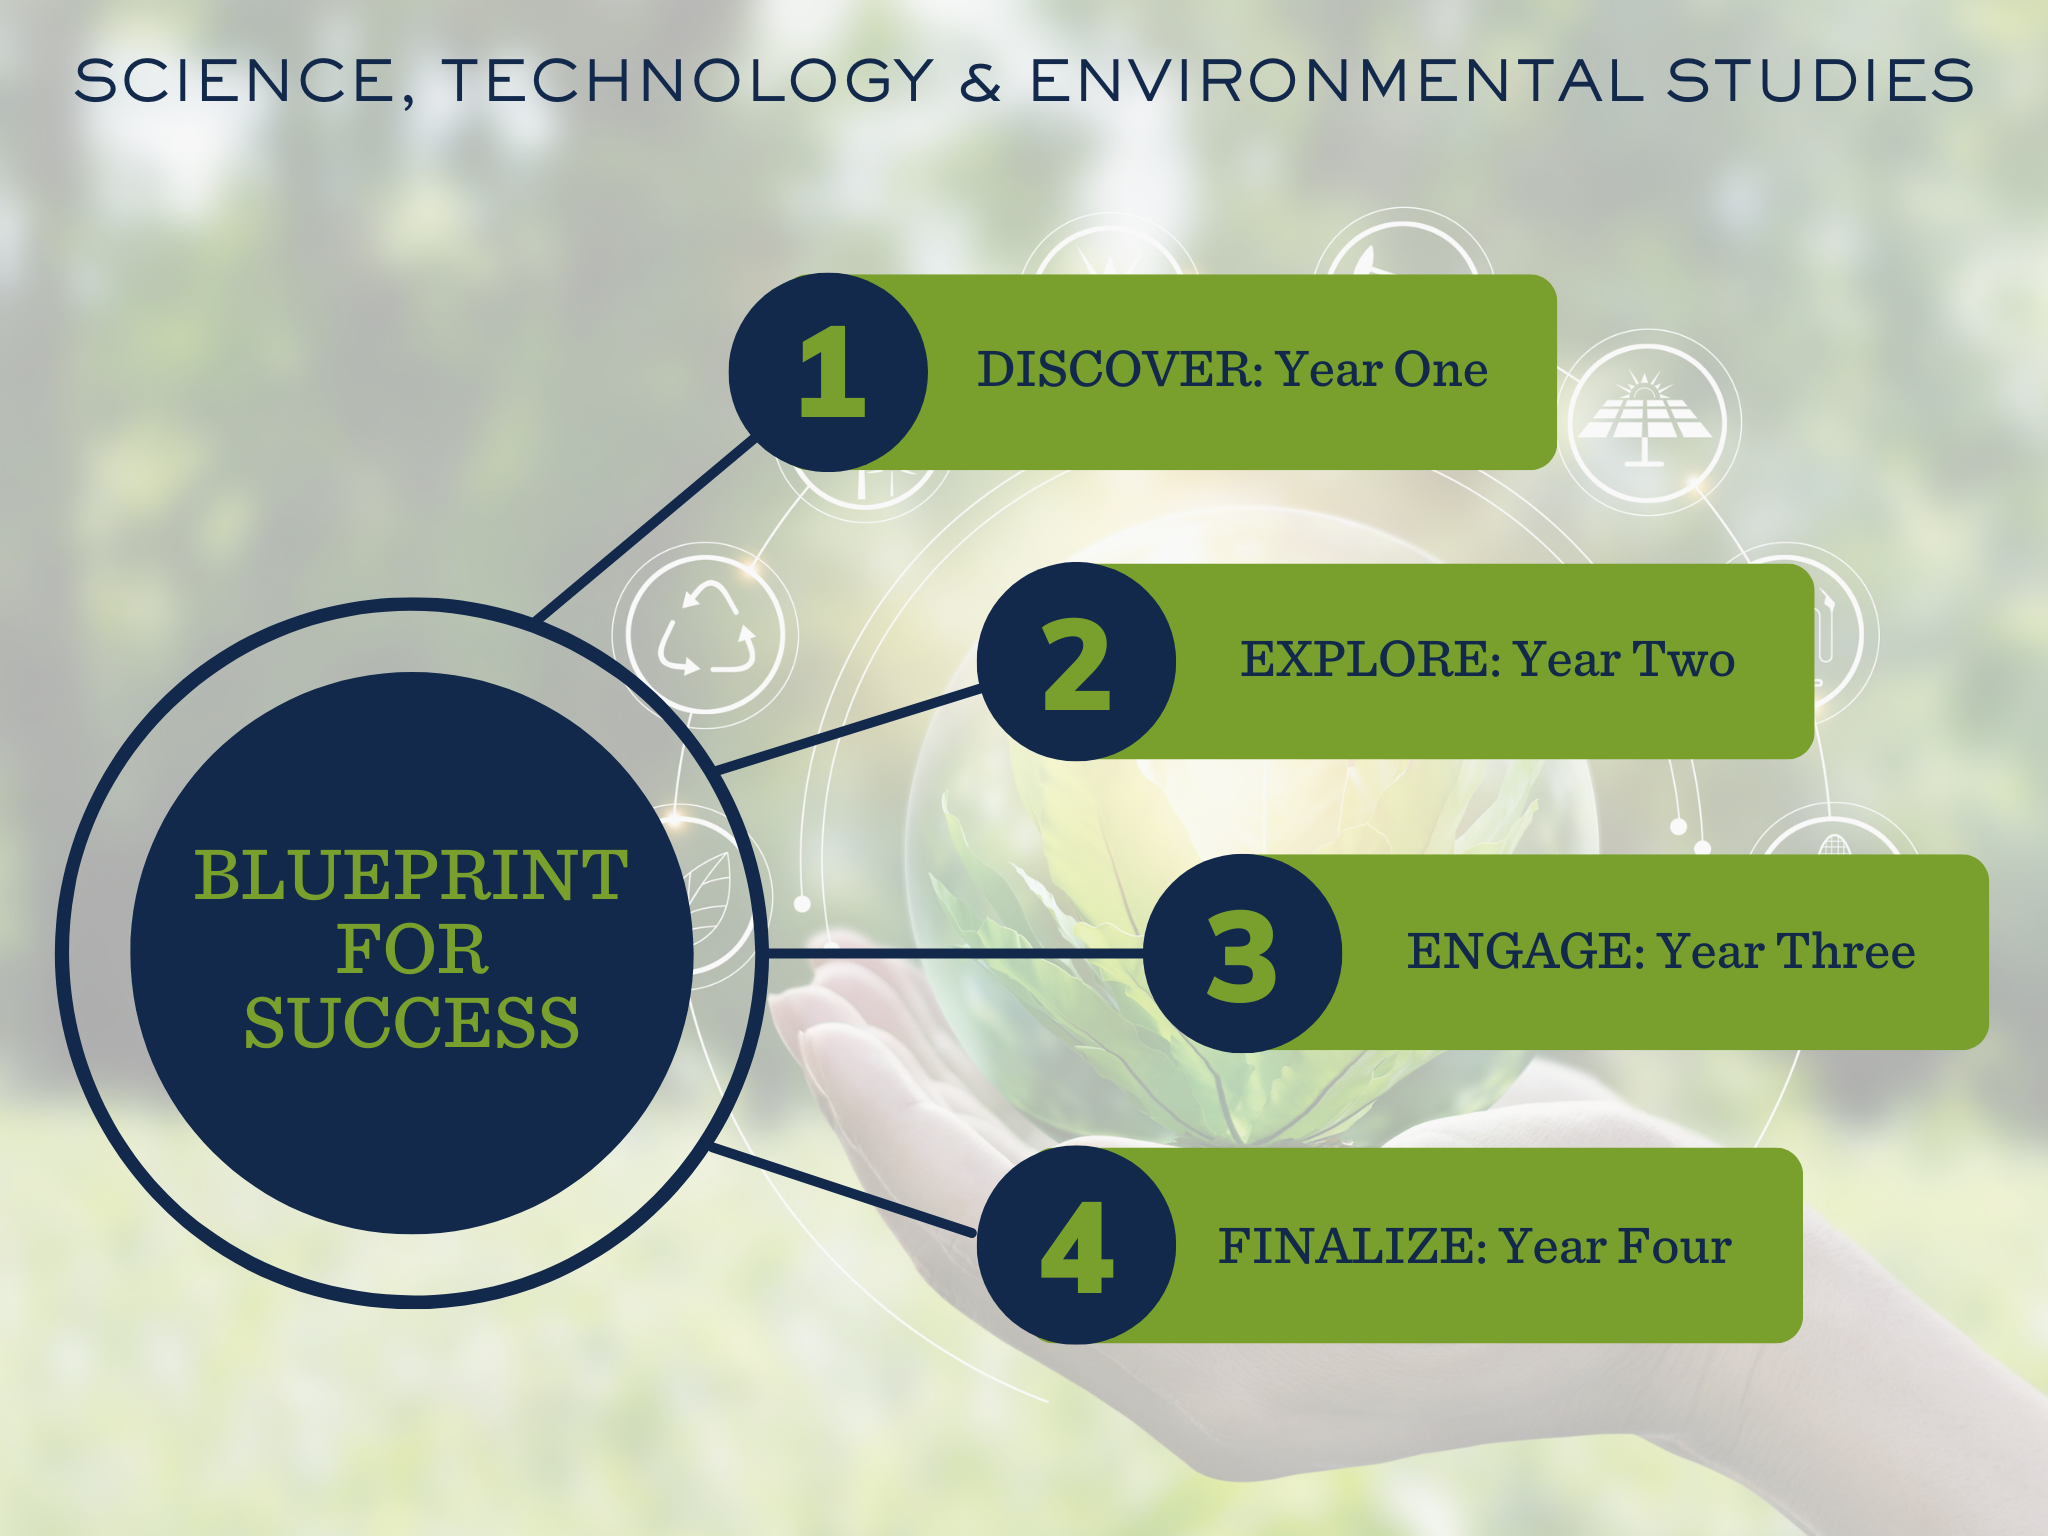 Science, Technology & Environmental Studies Blueprint for Success graphic. Circles and the following titles: Discover: Year One; Explore: Year Two; Engage: Year Three; Finalize: Year Four